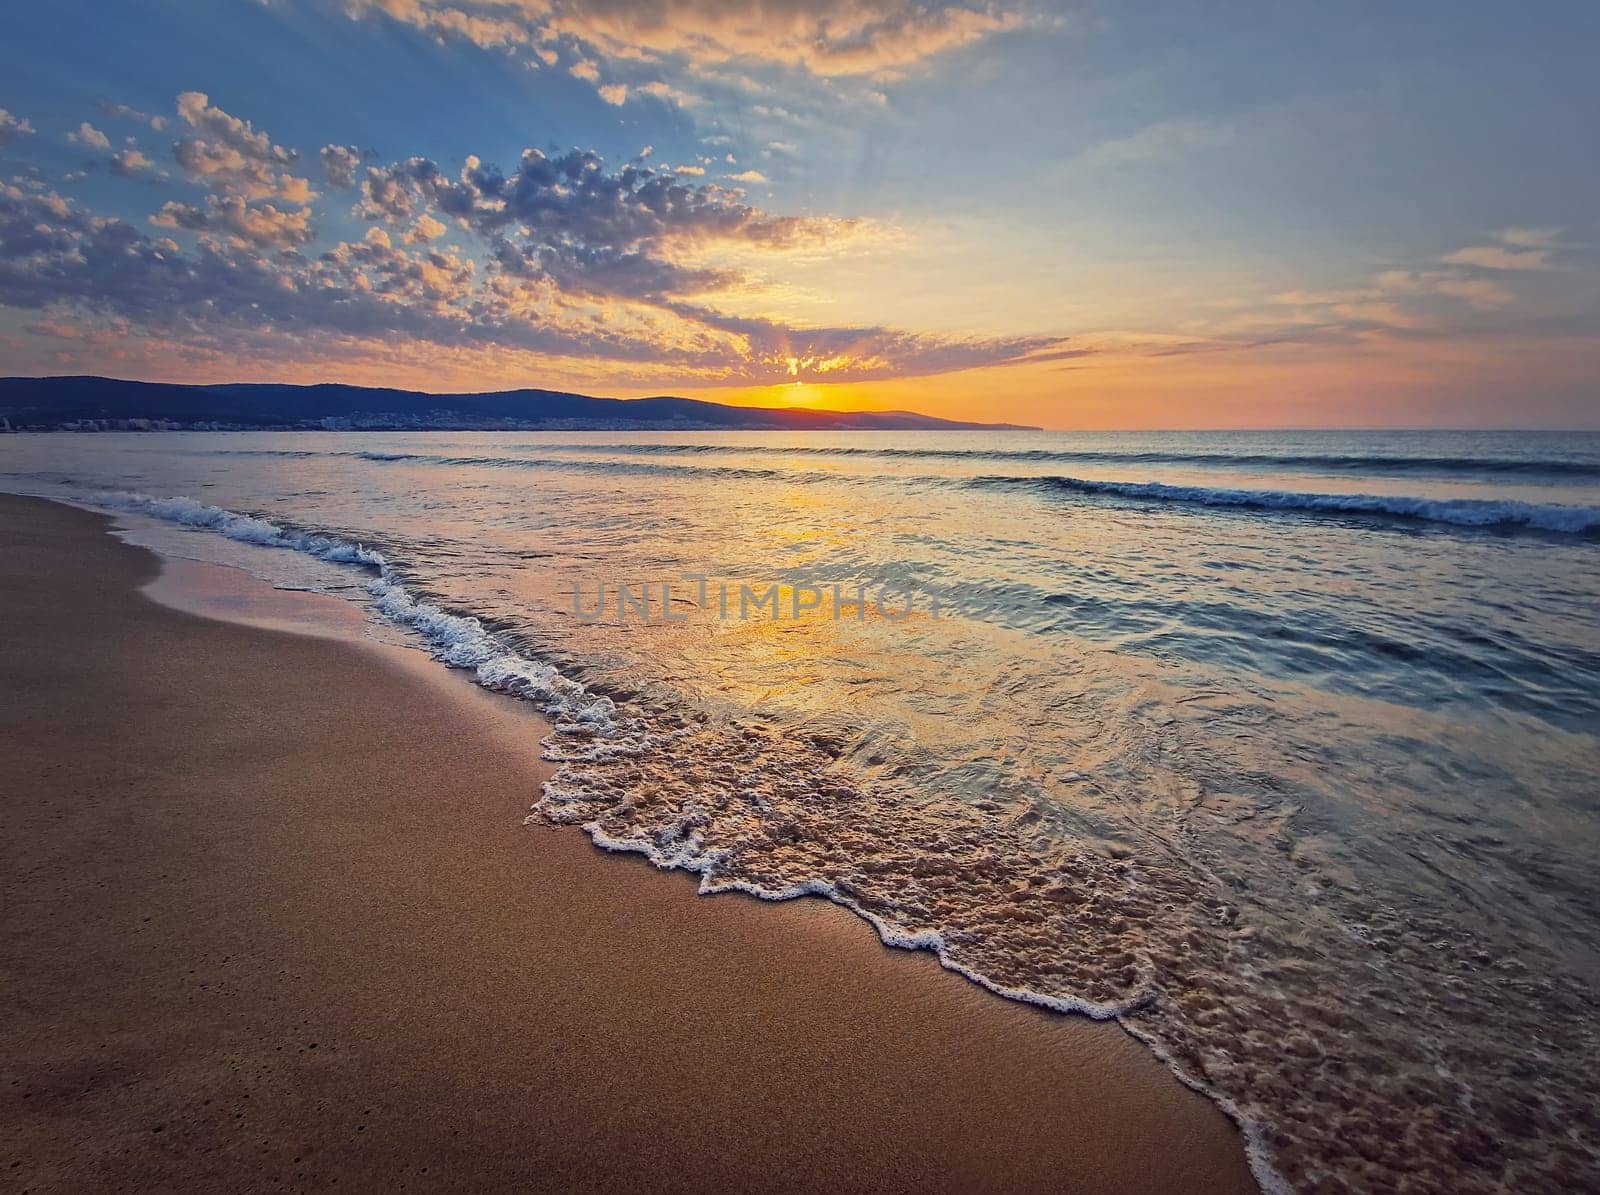 Sea sunrise scene, natural background. Early morning on the beach with a peaceful view to the dawn above the hills. Summer holiday seaside, travel concept by psychoshadow